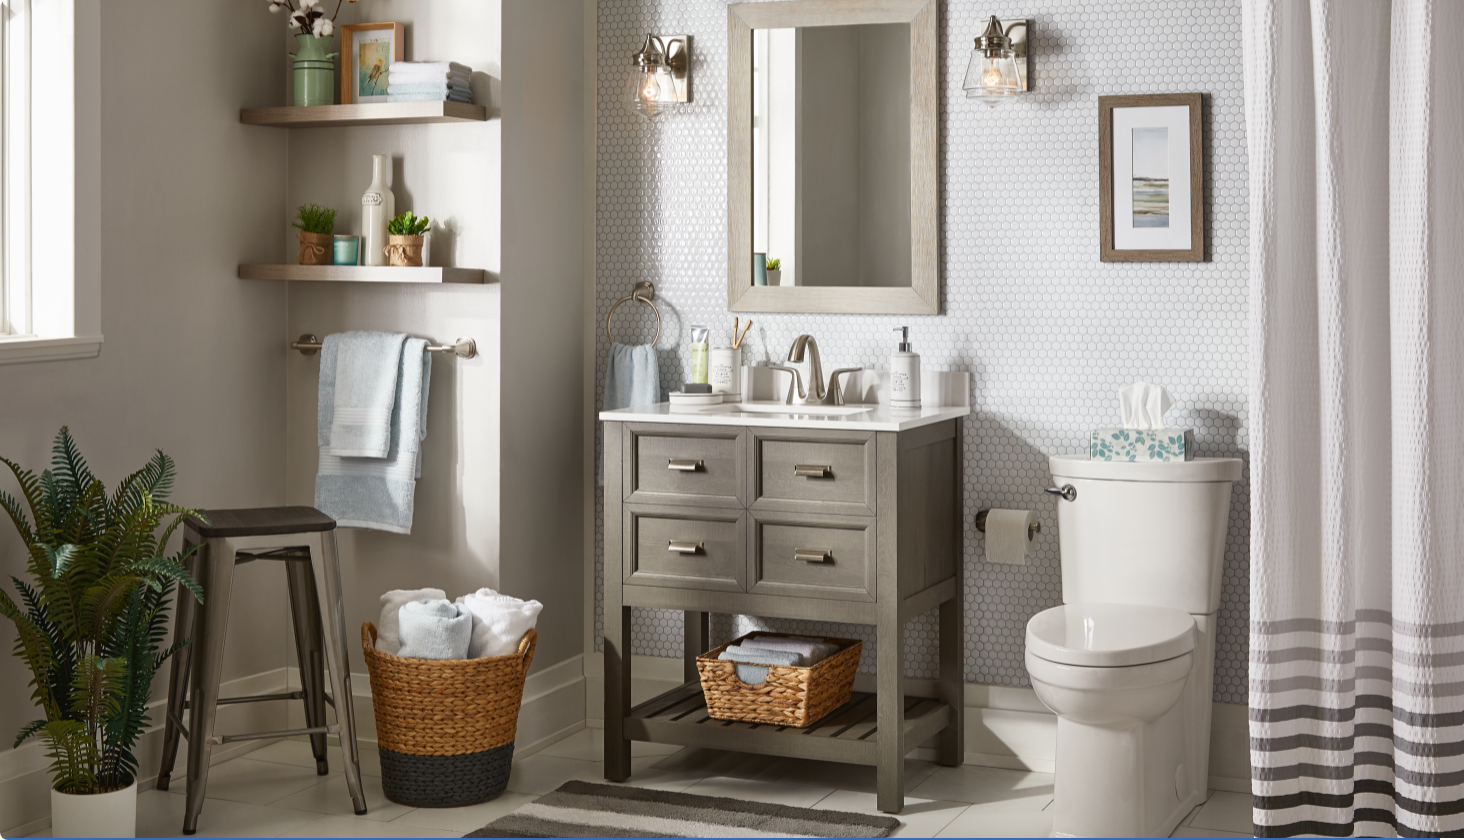 Grey and white bathroom with towel baskets, shower curtains, floor plant and decor